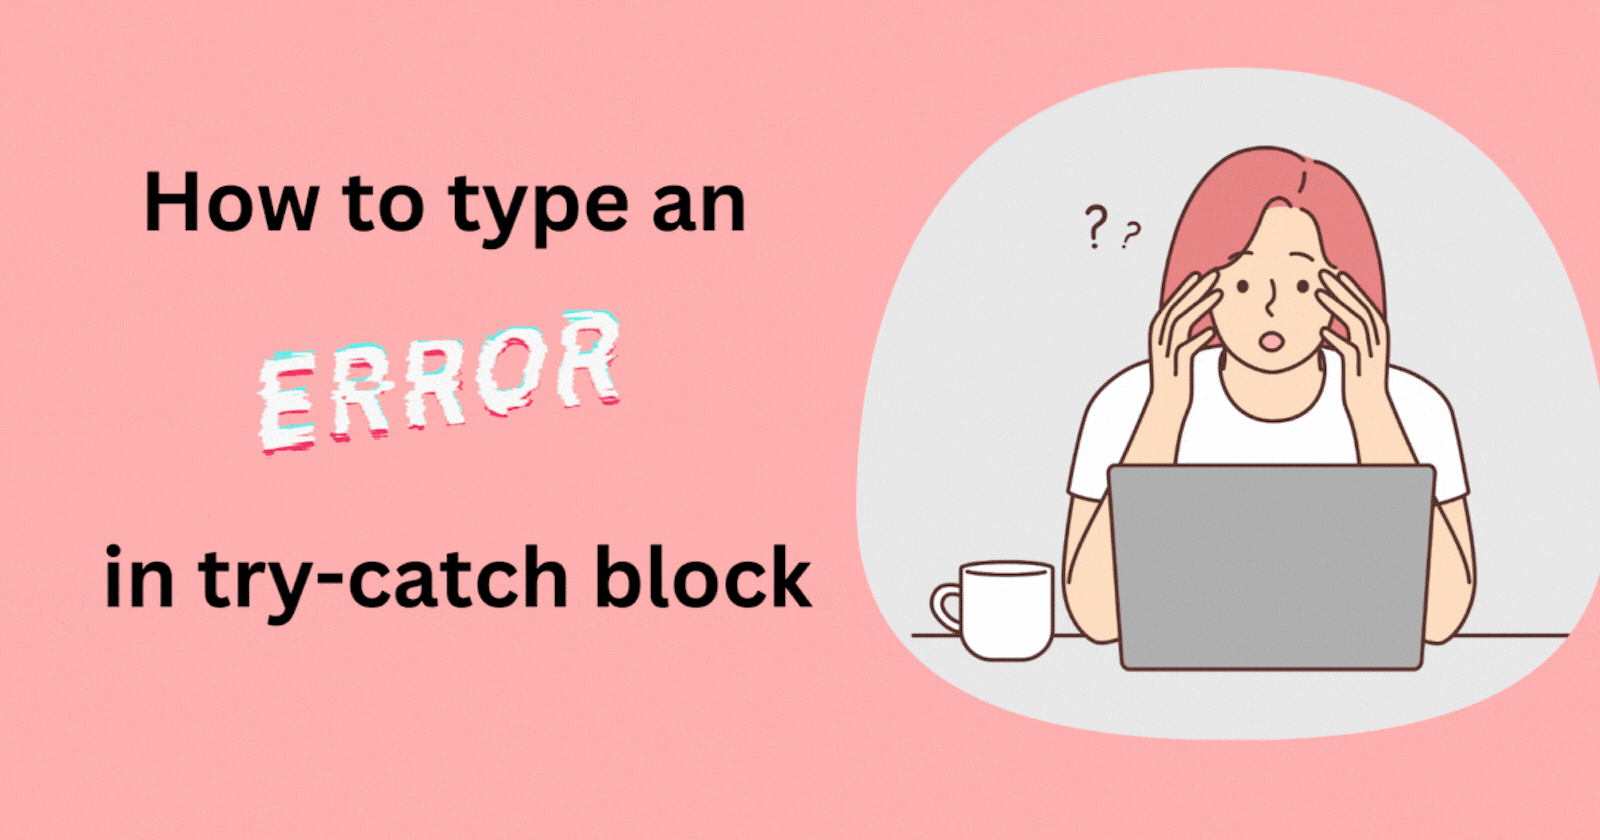 How to type an error in try-catch block